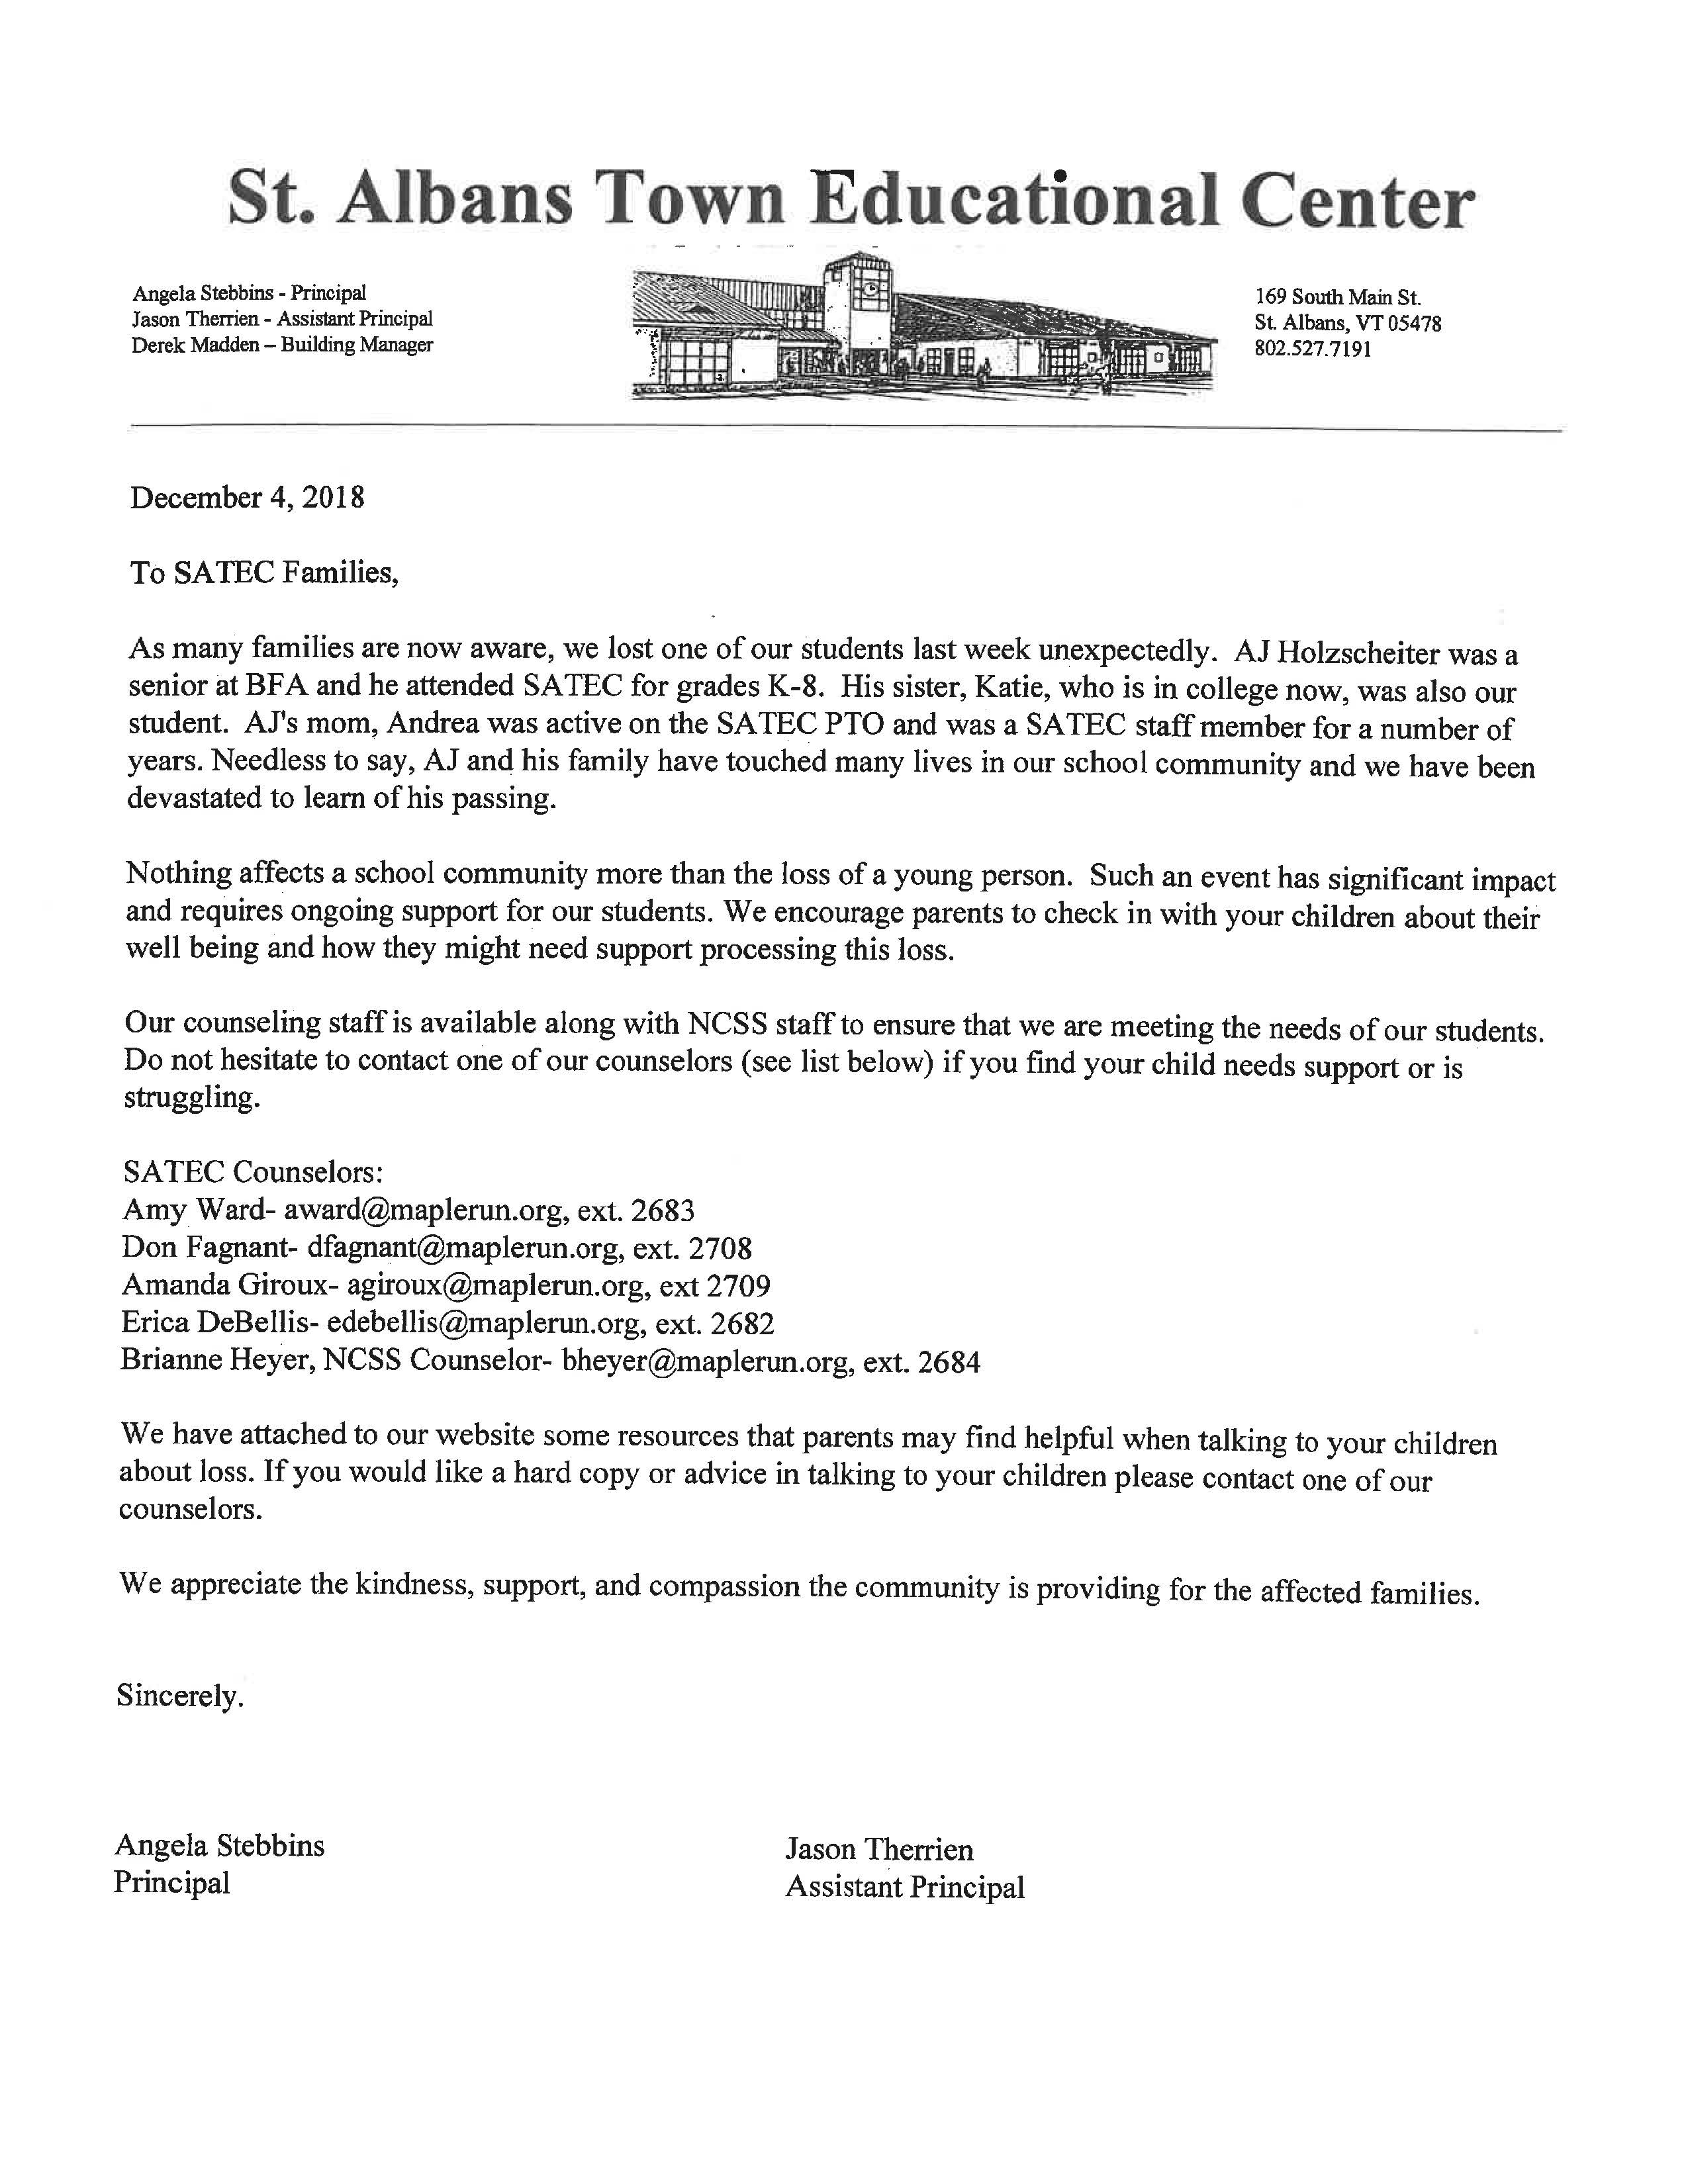 Letter dated December 4, 2018 from Principal Angela Stebbins and Assistant Principal Jason Therrien to SATEC Families